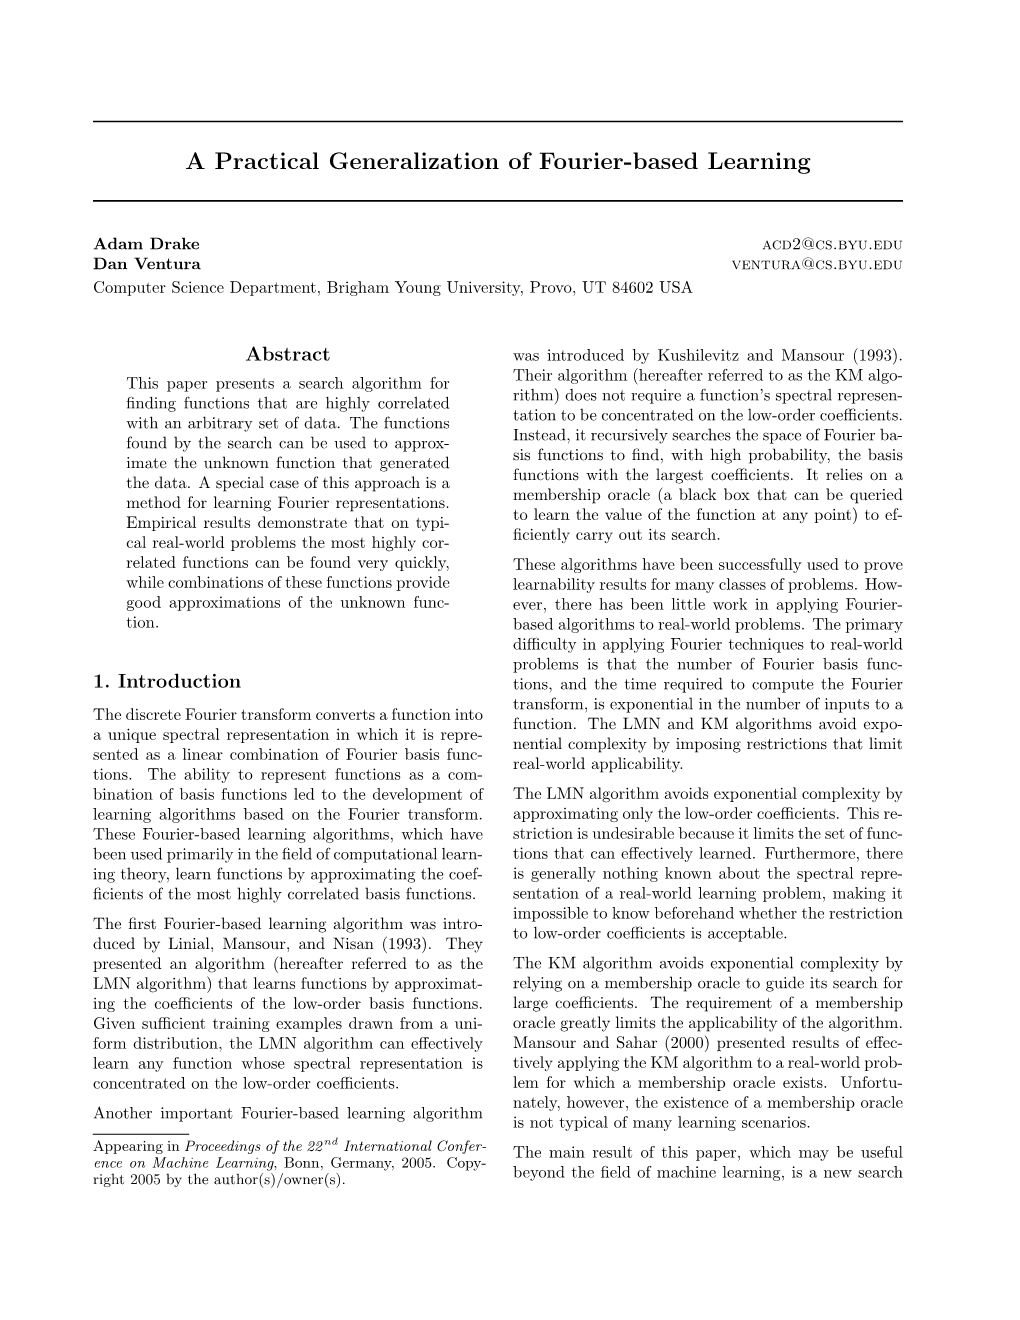 A Practical Generalization of Fourier-Based Learning